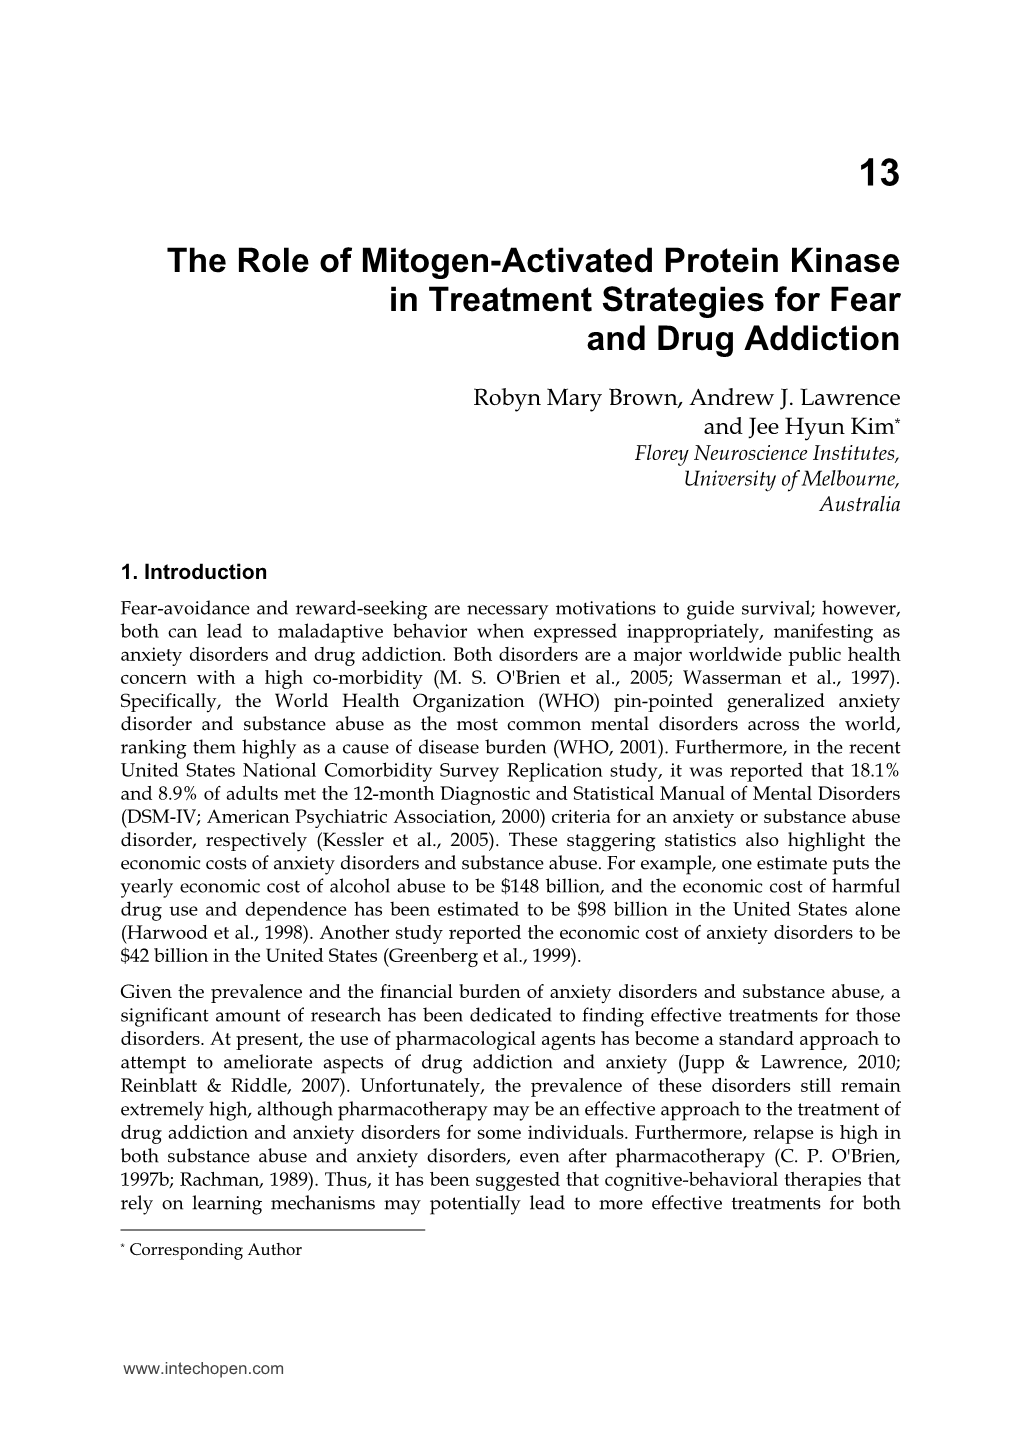 The Role of Mitogen-Activated Protein Kinase in Treatment Strategies for Fear and Drug Addiction